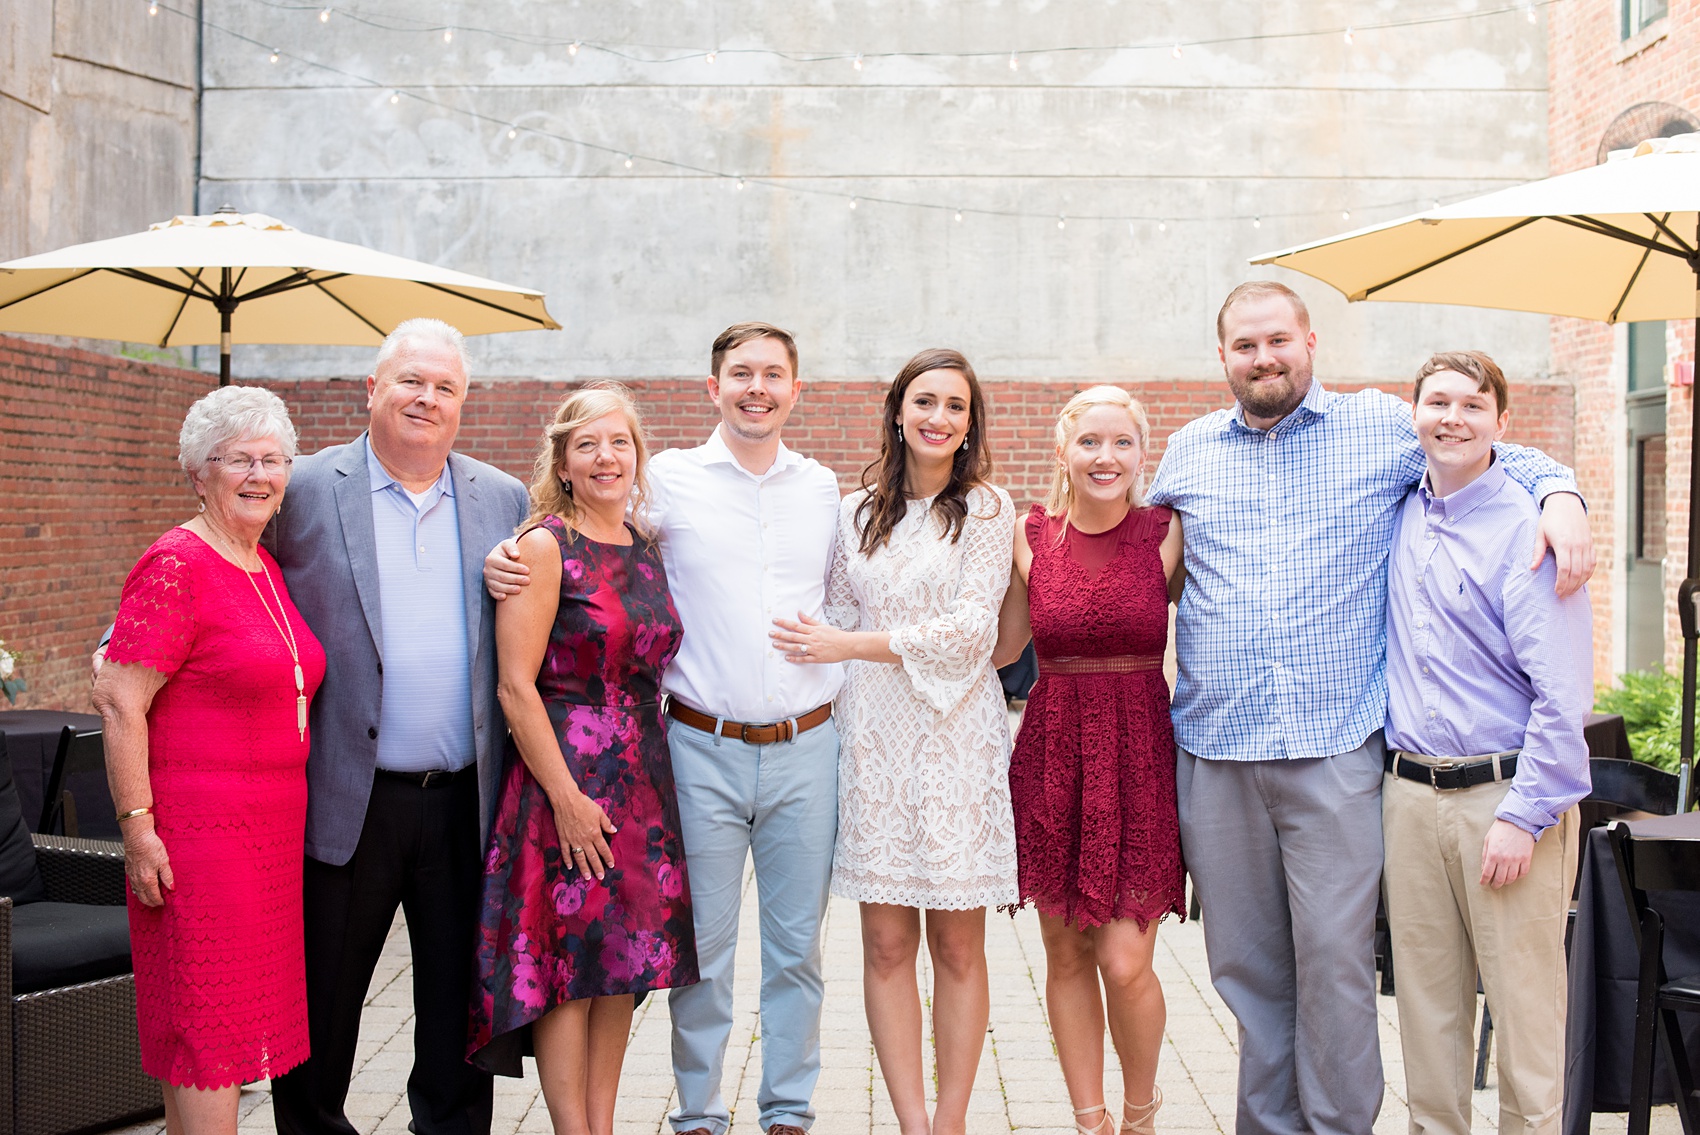 Mikkel Paige Photography photos from a downtown Raleigh wedding rehearsal dinner at Sitti restaurant. Picture of the bride and groom with their family.